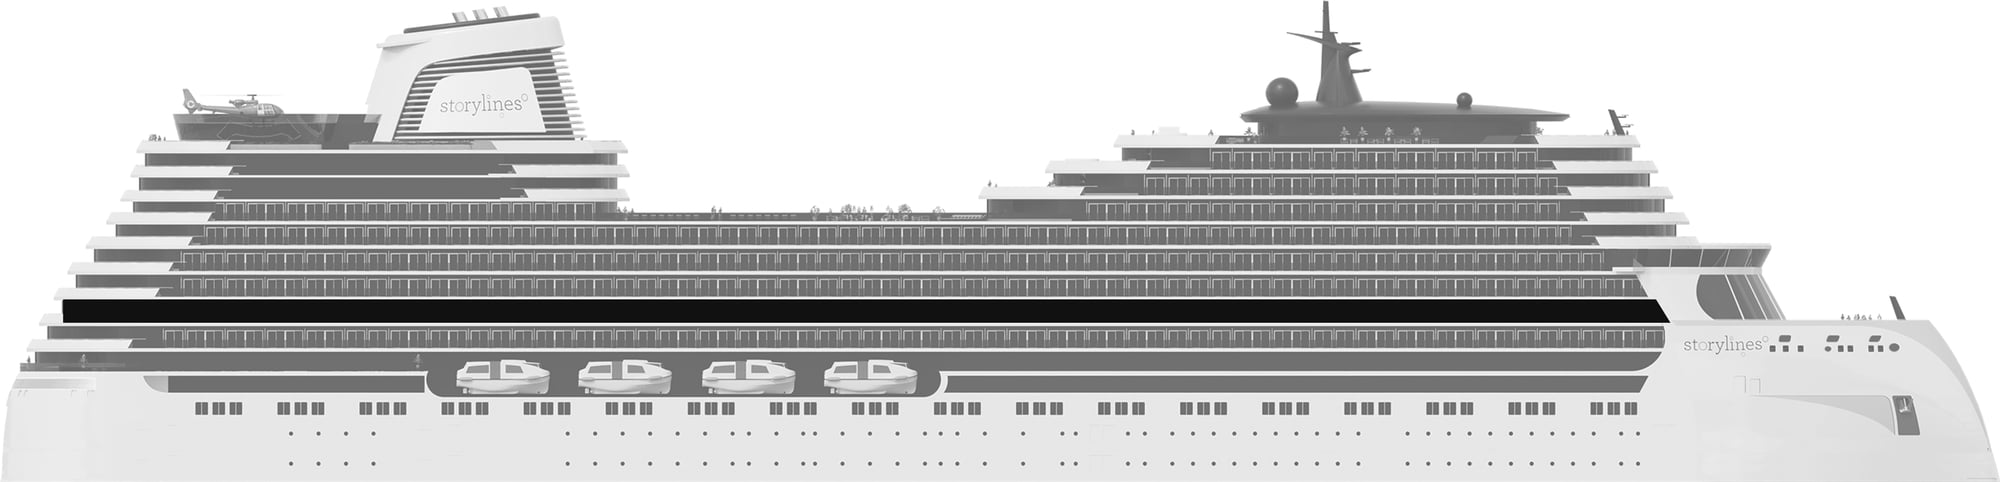 Profile shot of Storylines residential ship showing the location of Deck 10